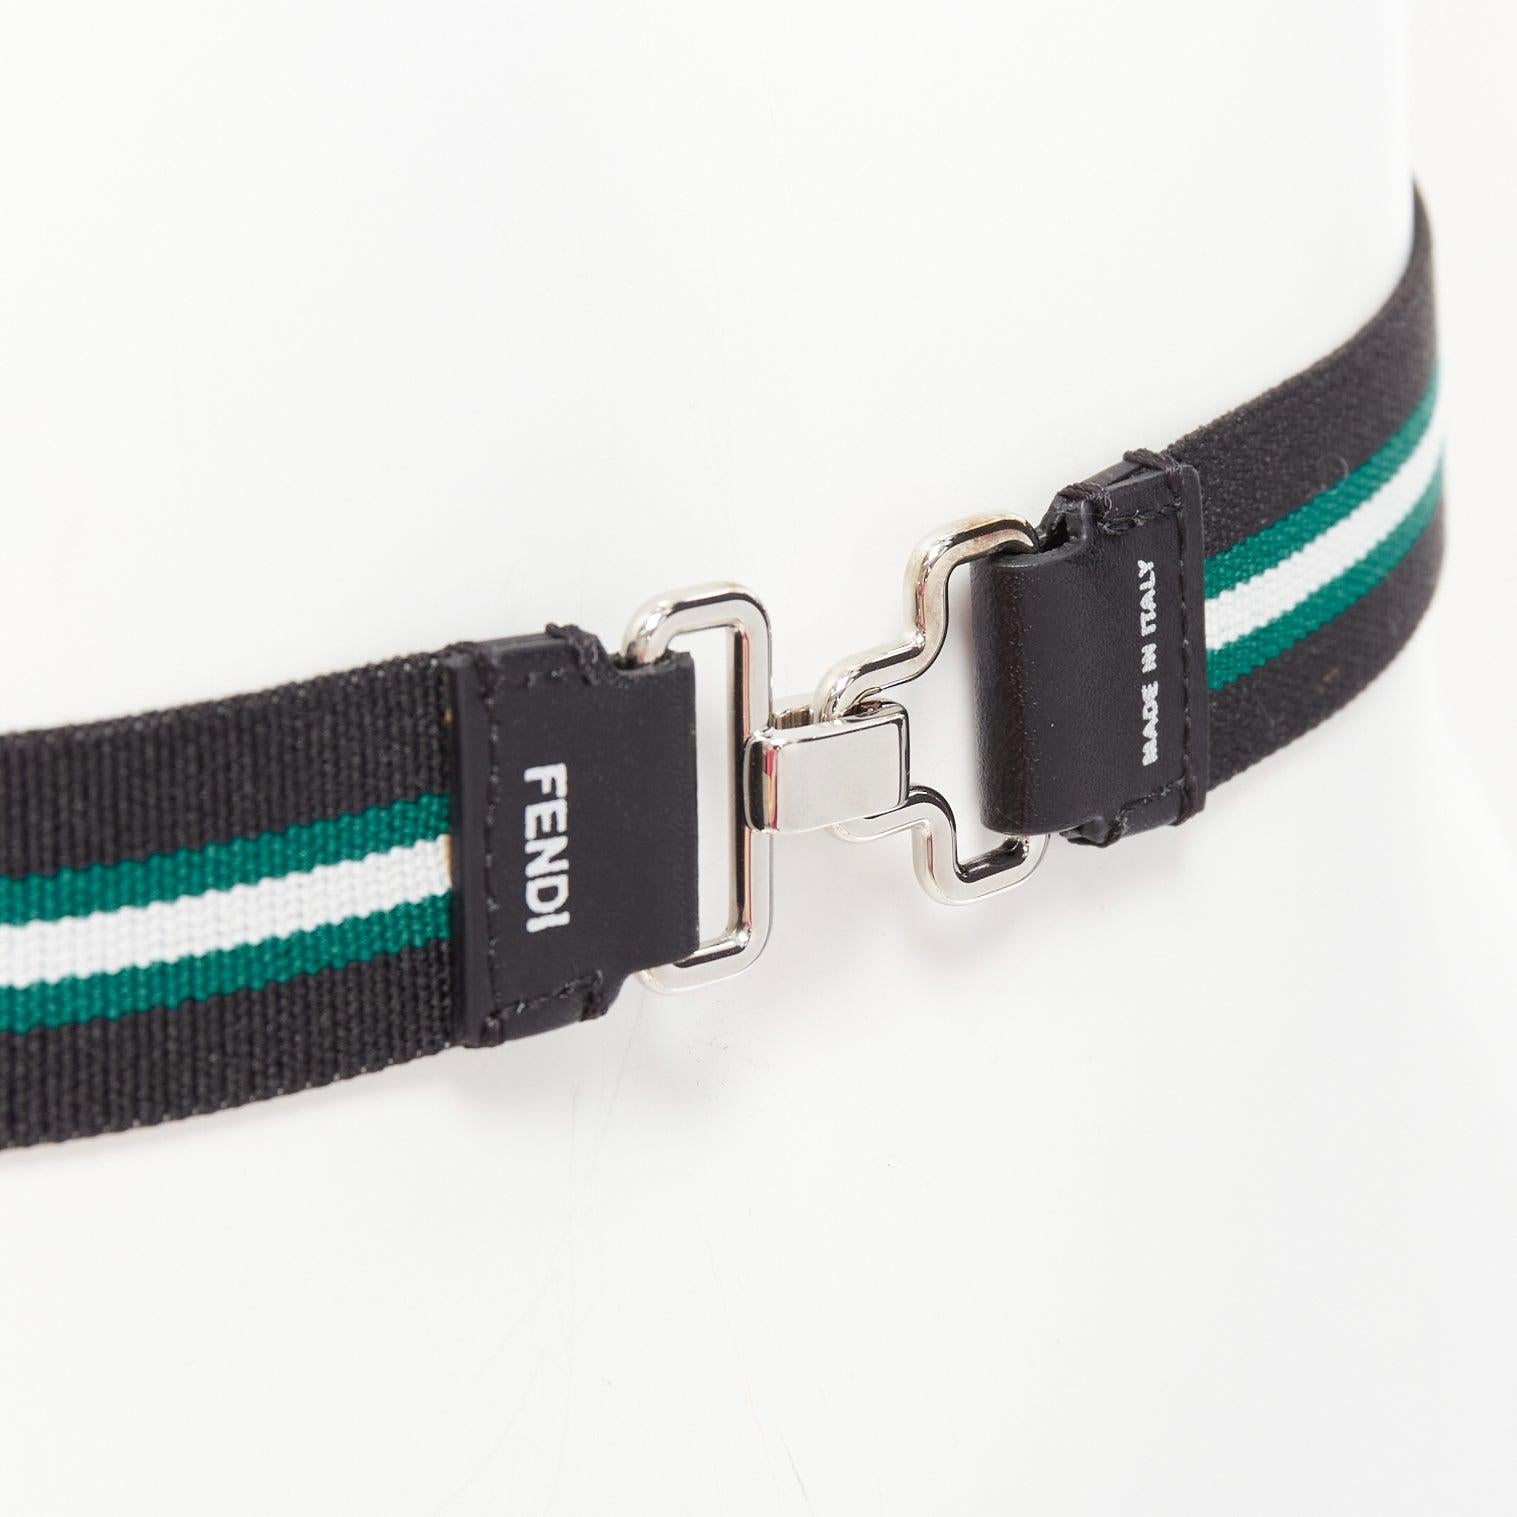 FENDI silver logo black green stripe stretch fabric leather skinny belt
Reference: AAWC/A01193
Brand: Fendi
Material: Leather, Metal, Fabric
Color: Green, Black
Pattern: Striped
Closure: Hook & Bar
Lining: Multicolour Fabric
Extra Details: